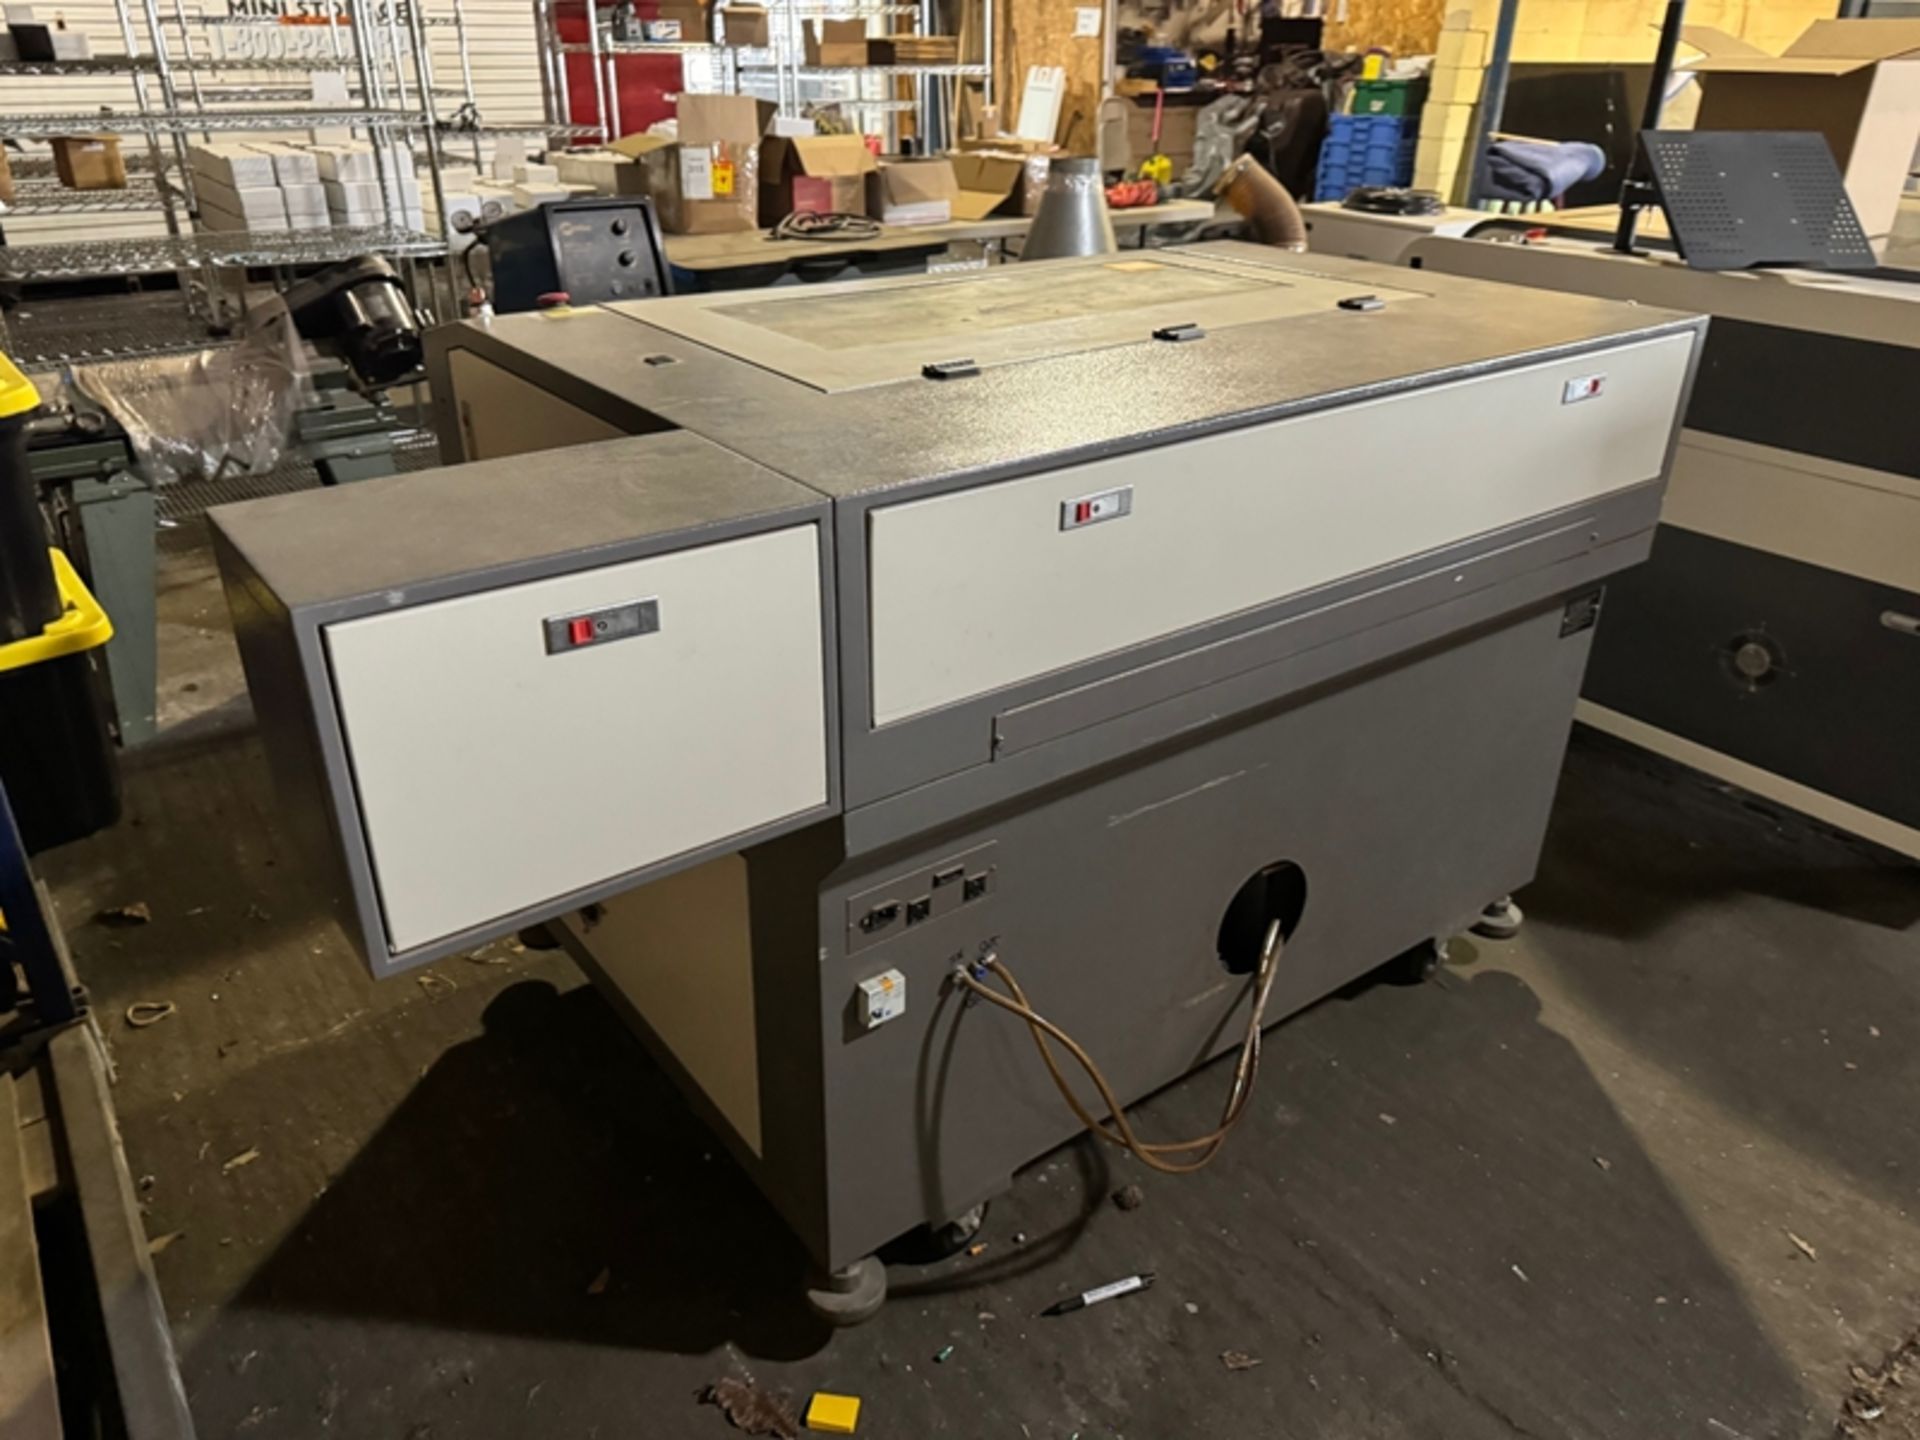 2008 JINAN Model LC6090 laser engraving machine approximately 36" X 24" cutting surface area with - Image 3 of 6